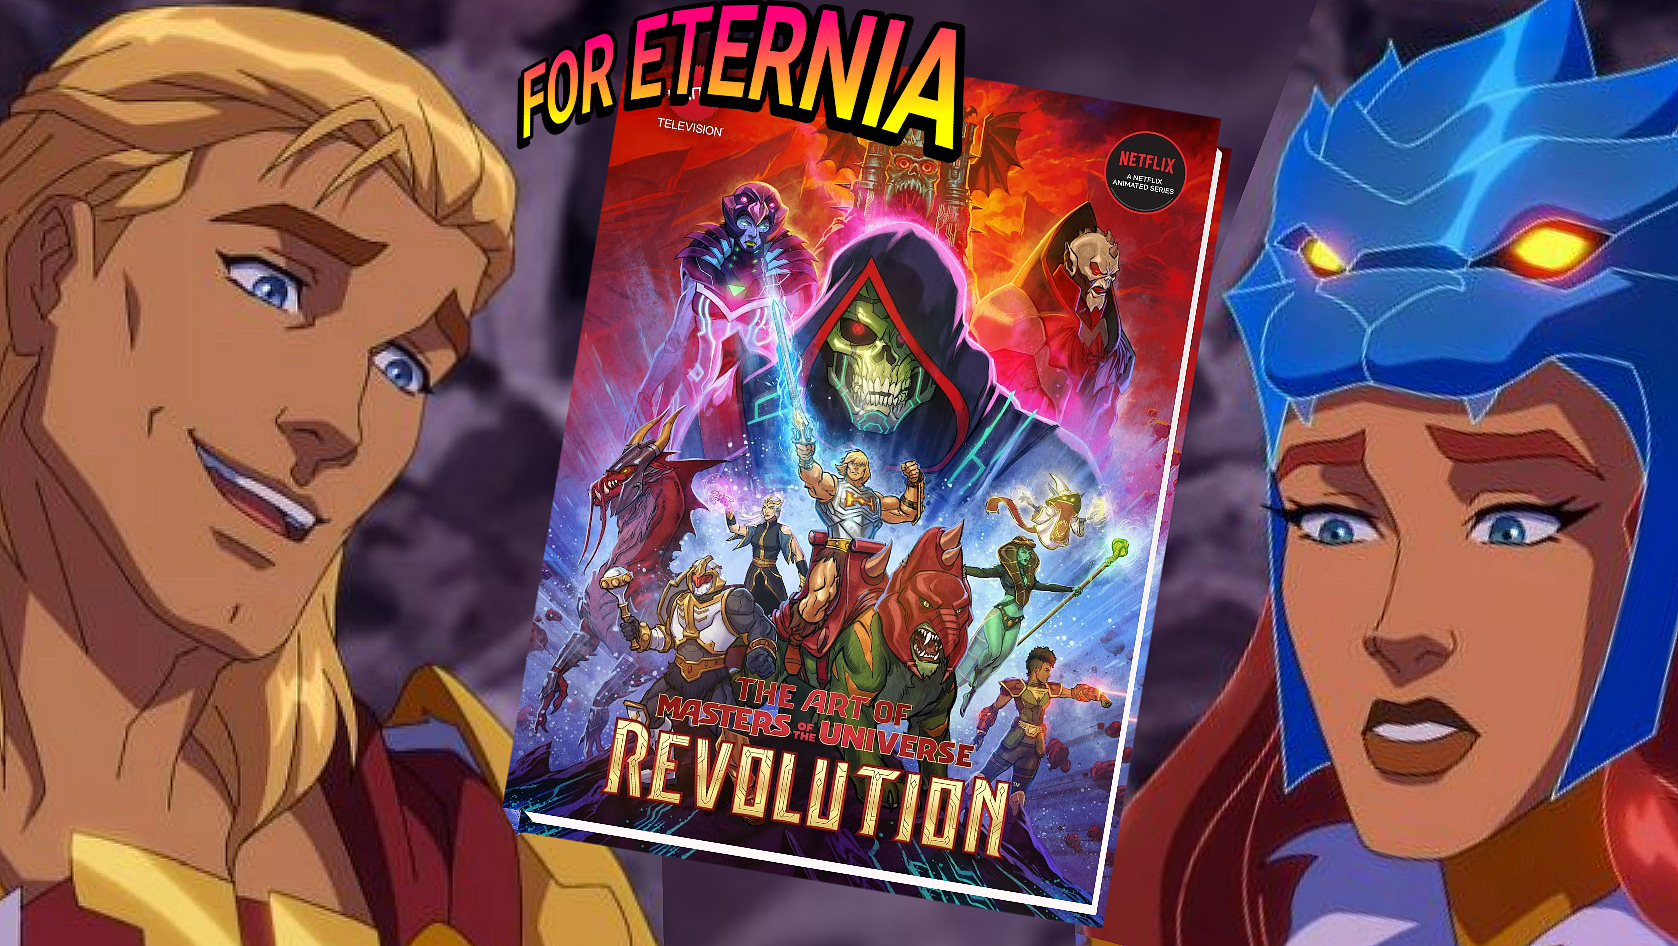 ”The Art of Masters of the Universe: Revolution” Hardcover Book is now available for Pre-Order